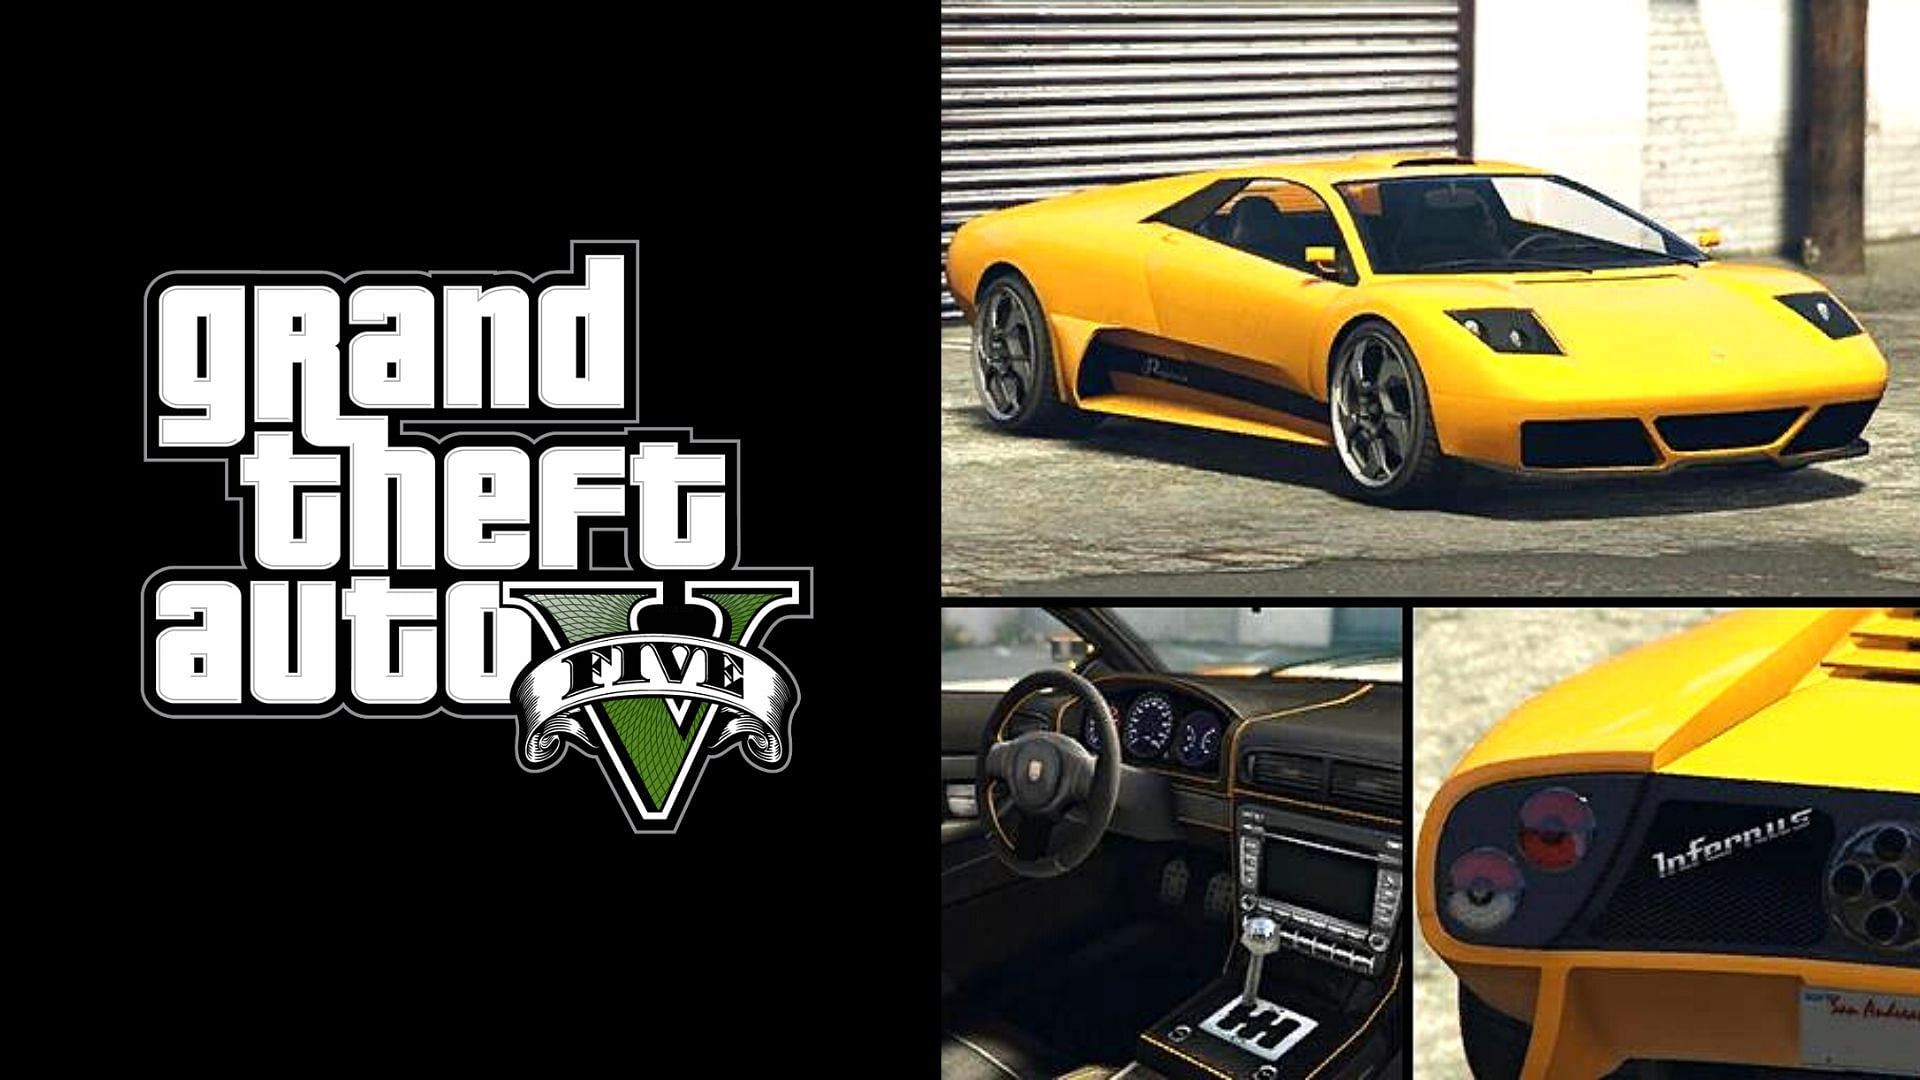 A brief about the Pegassi Infernus available in GTA 5